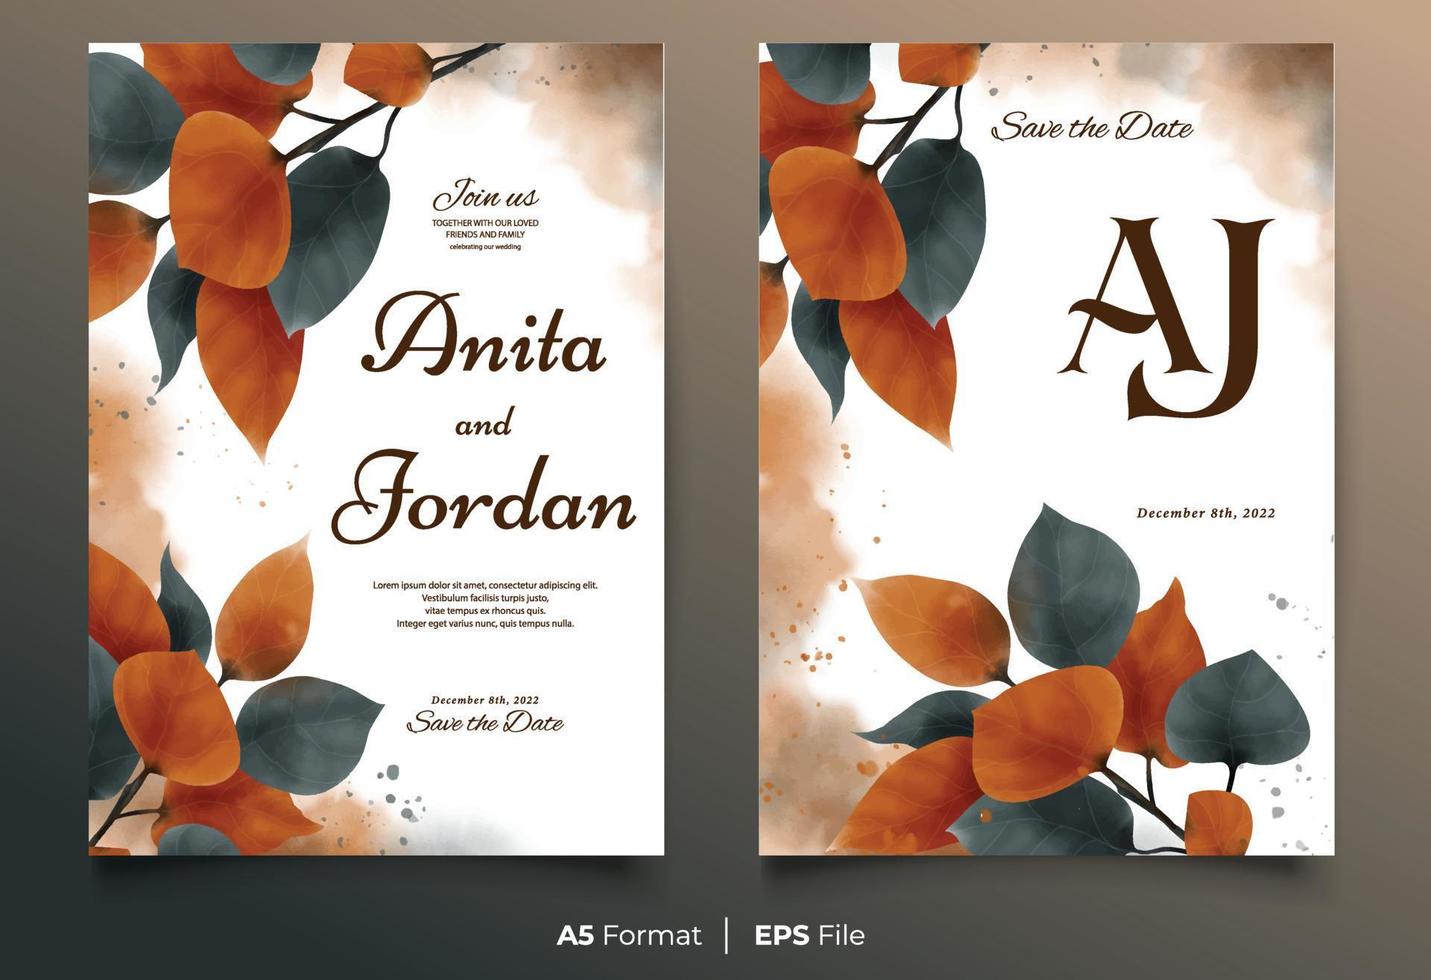 Watercolor wedding invitation template with orange and black flower leaf ornament vector